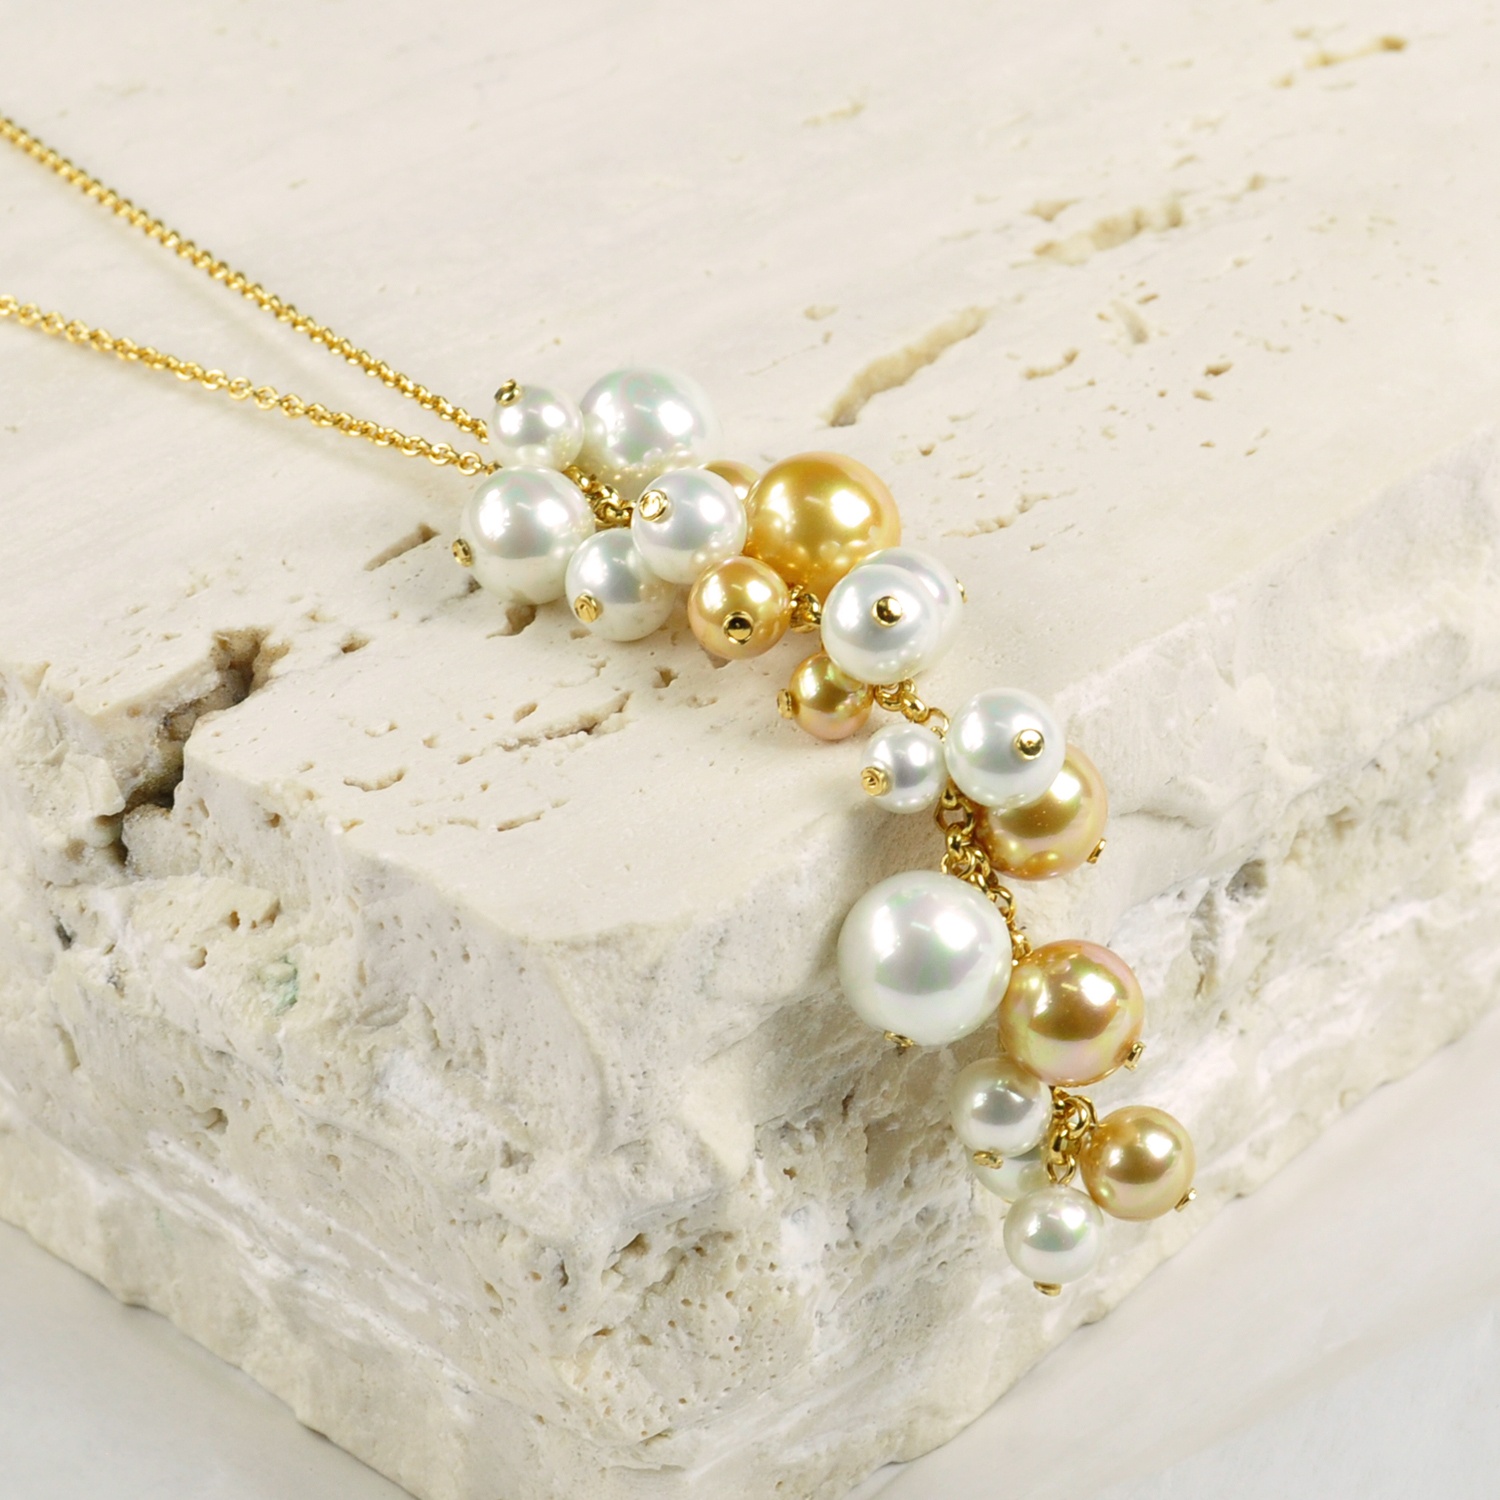 Necklace with a pendant in a cascade of pearls in golden tones 2